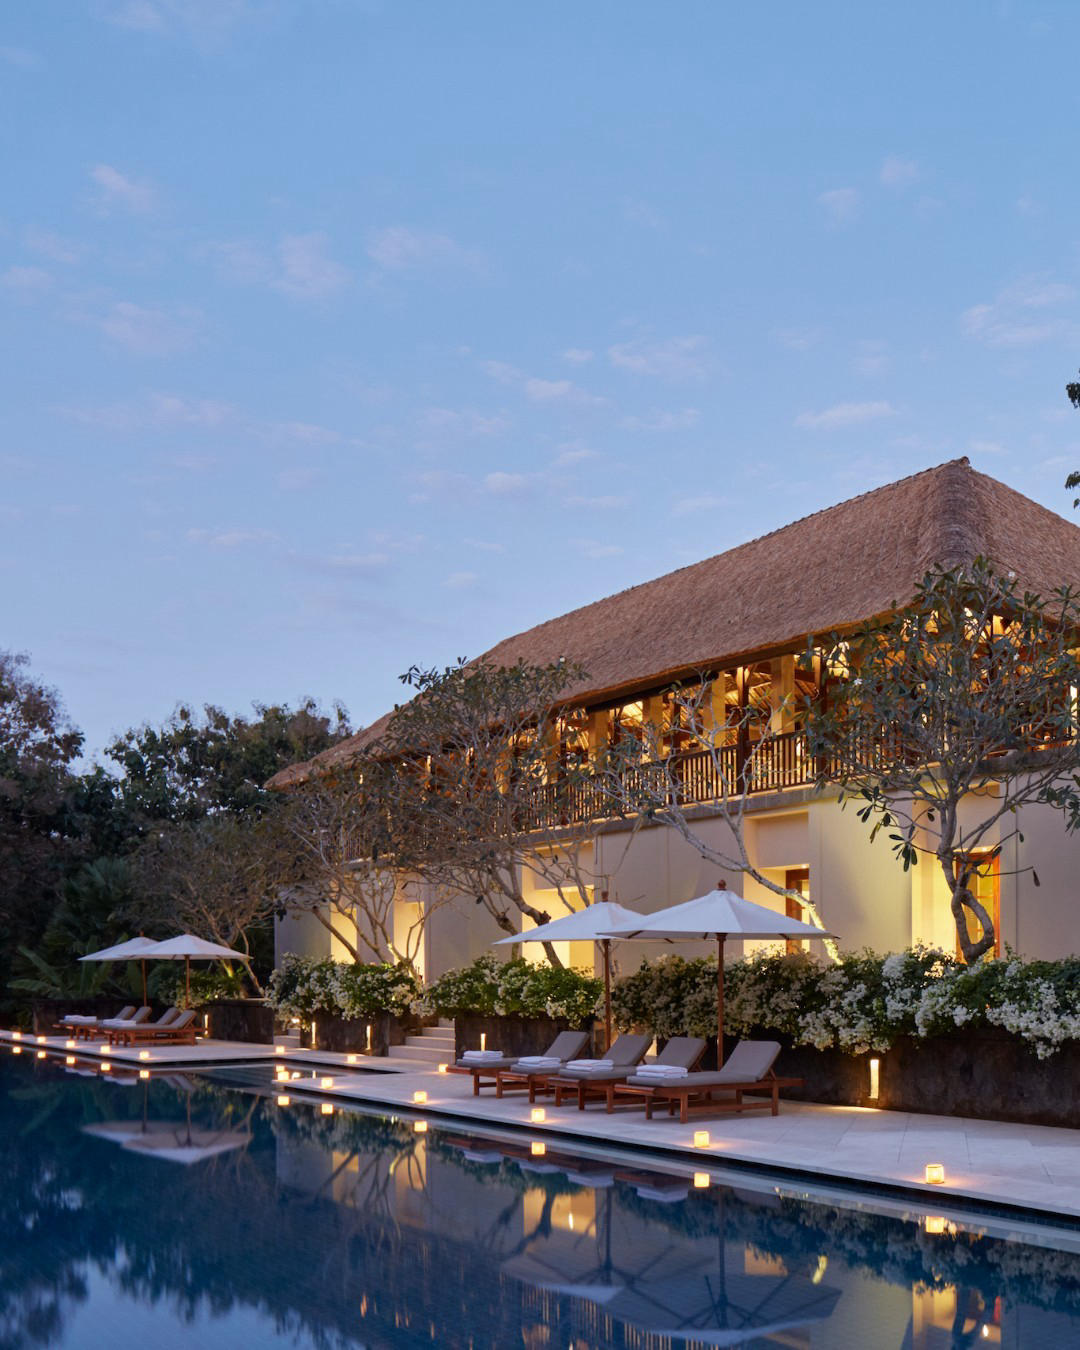 image  1 Aman Villas at Nusa Dua - The approach of twilight suffuses the sky with purple and orange, setting